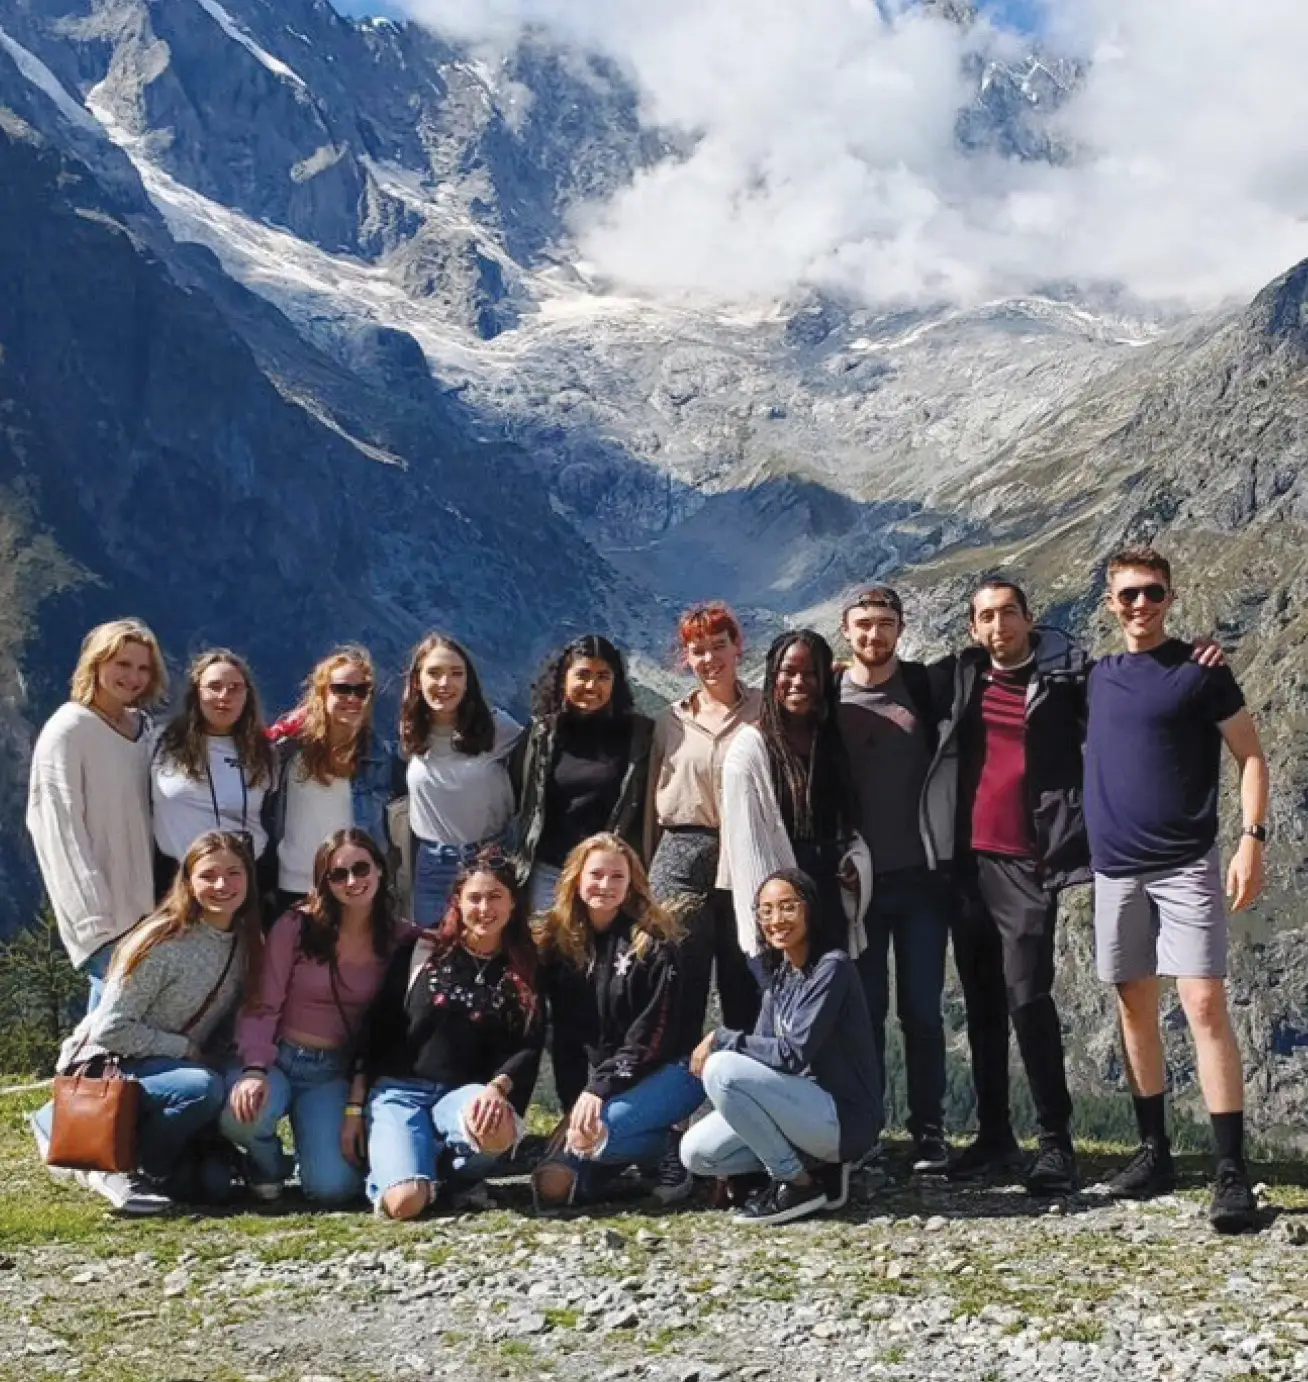 Group photo of students abroad atop a mountain